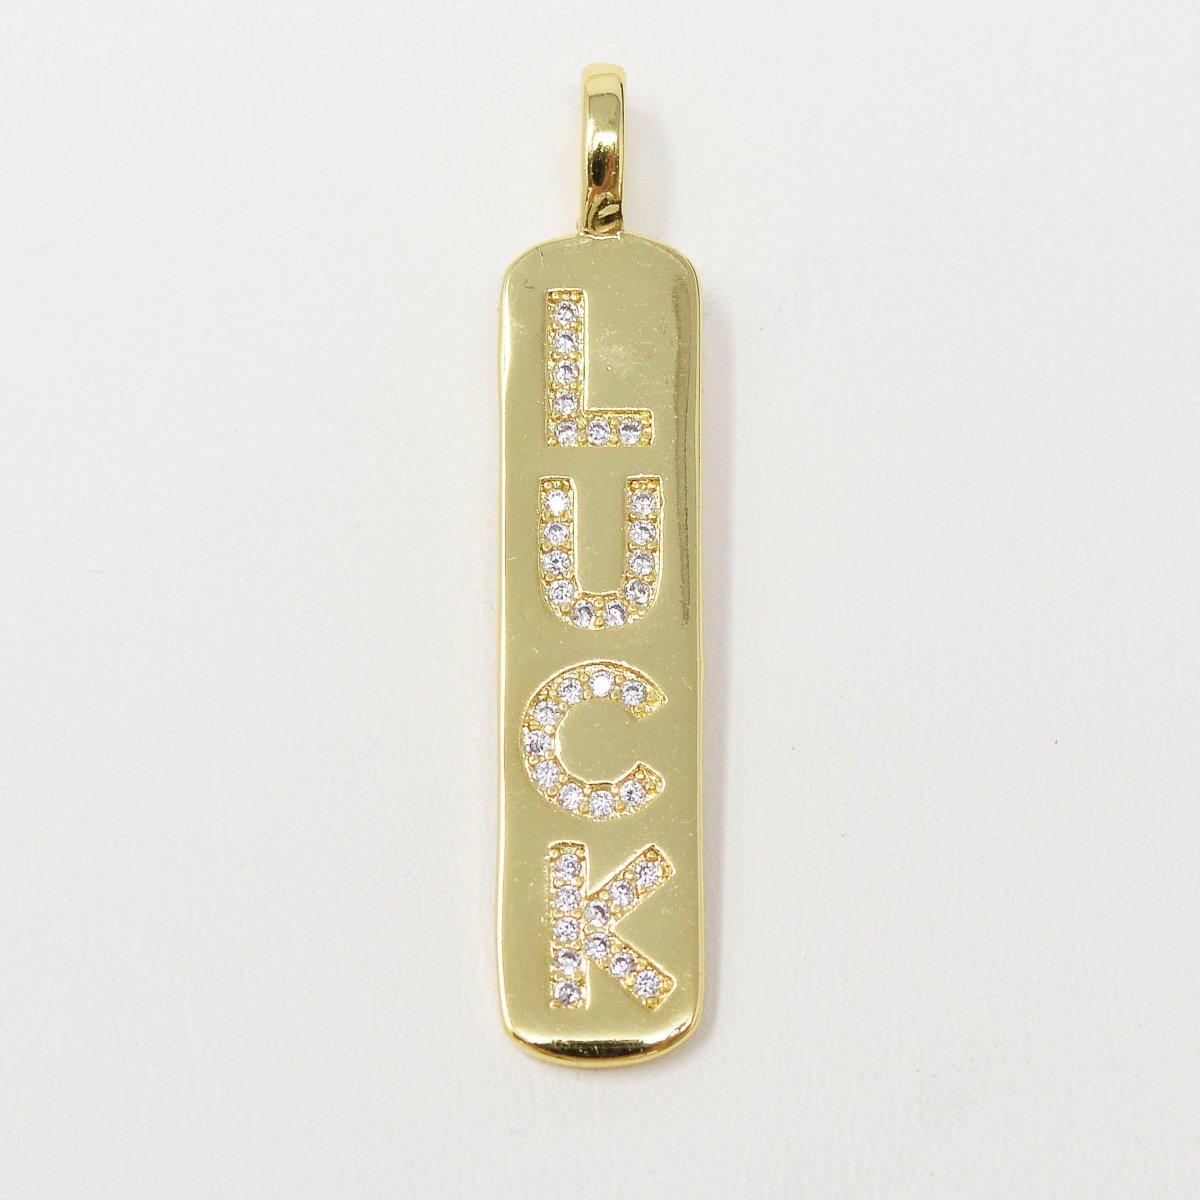 Micro Pave Luck Word Charm Rectangle in 14k Gold Filled Drop Pendant Long Encouragin Word Girl Charm for Necklace Earring Component, J-278 - DLUXCA